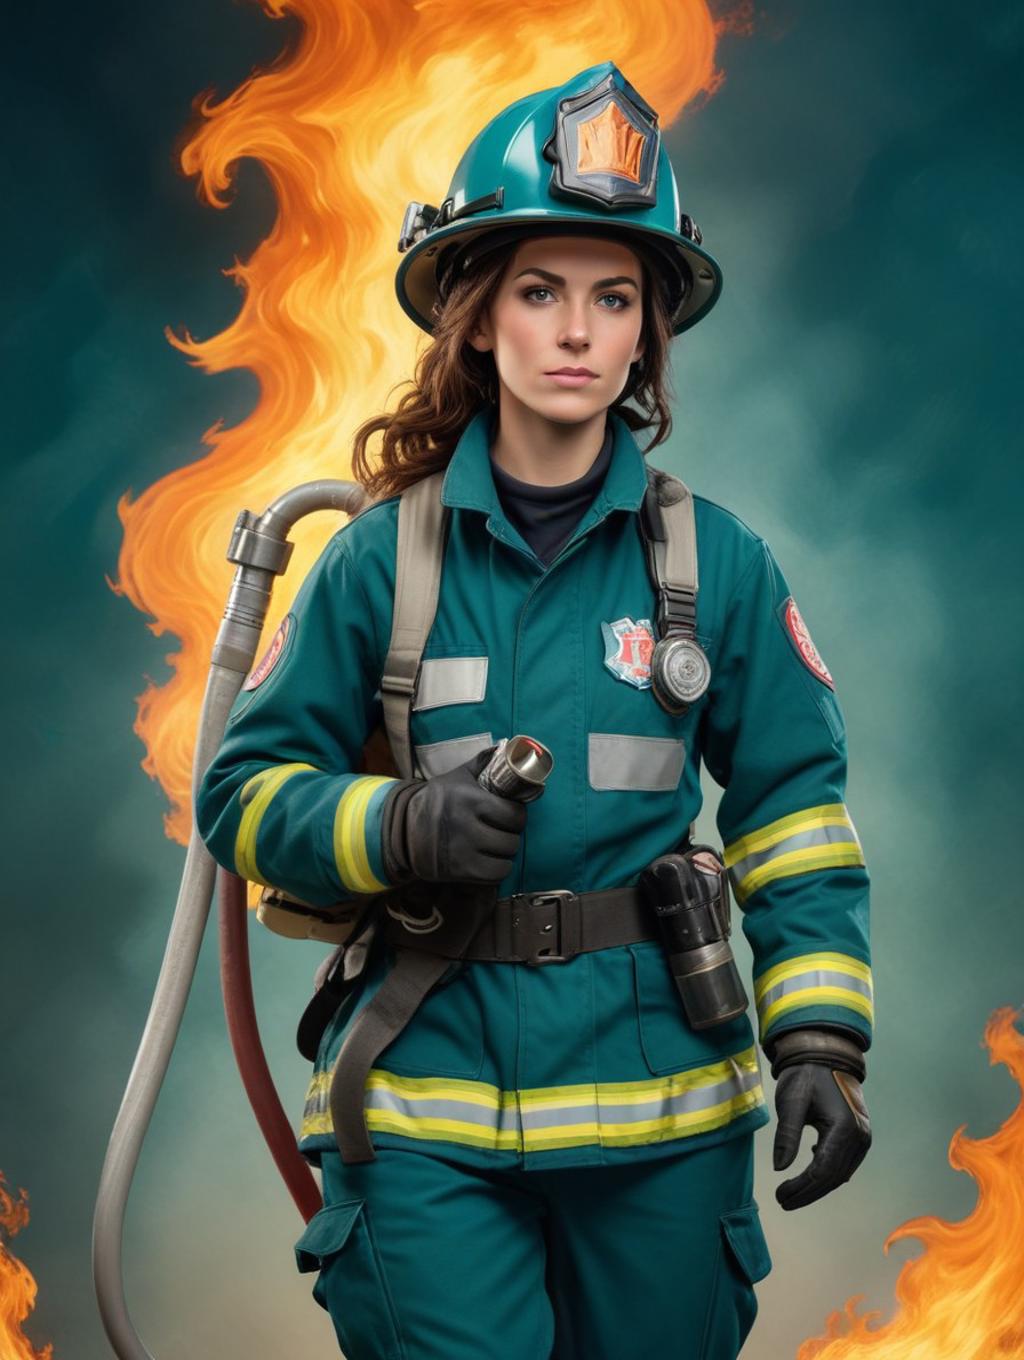 Fire Fighters Women: Portrait Photography & Wall Frames-Theme:5